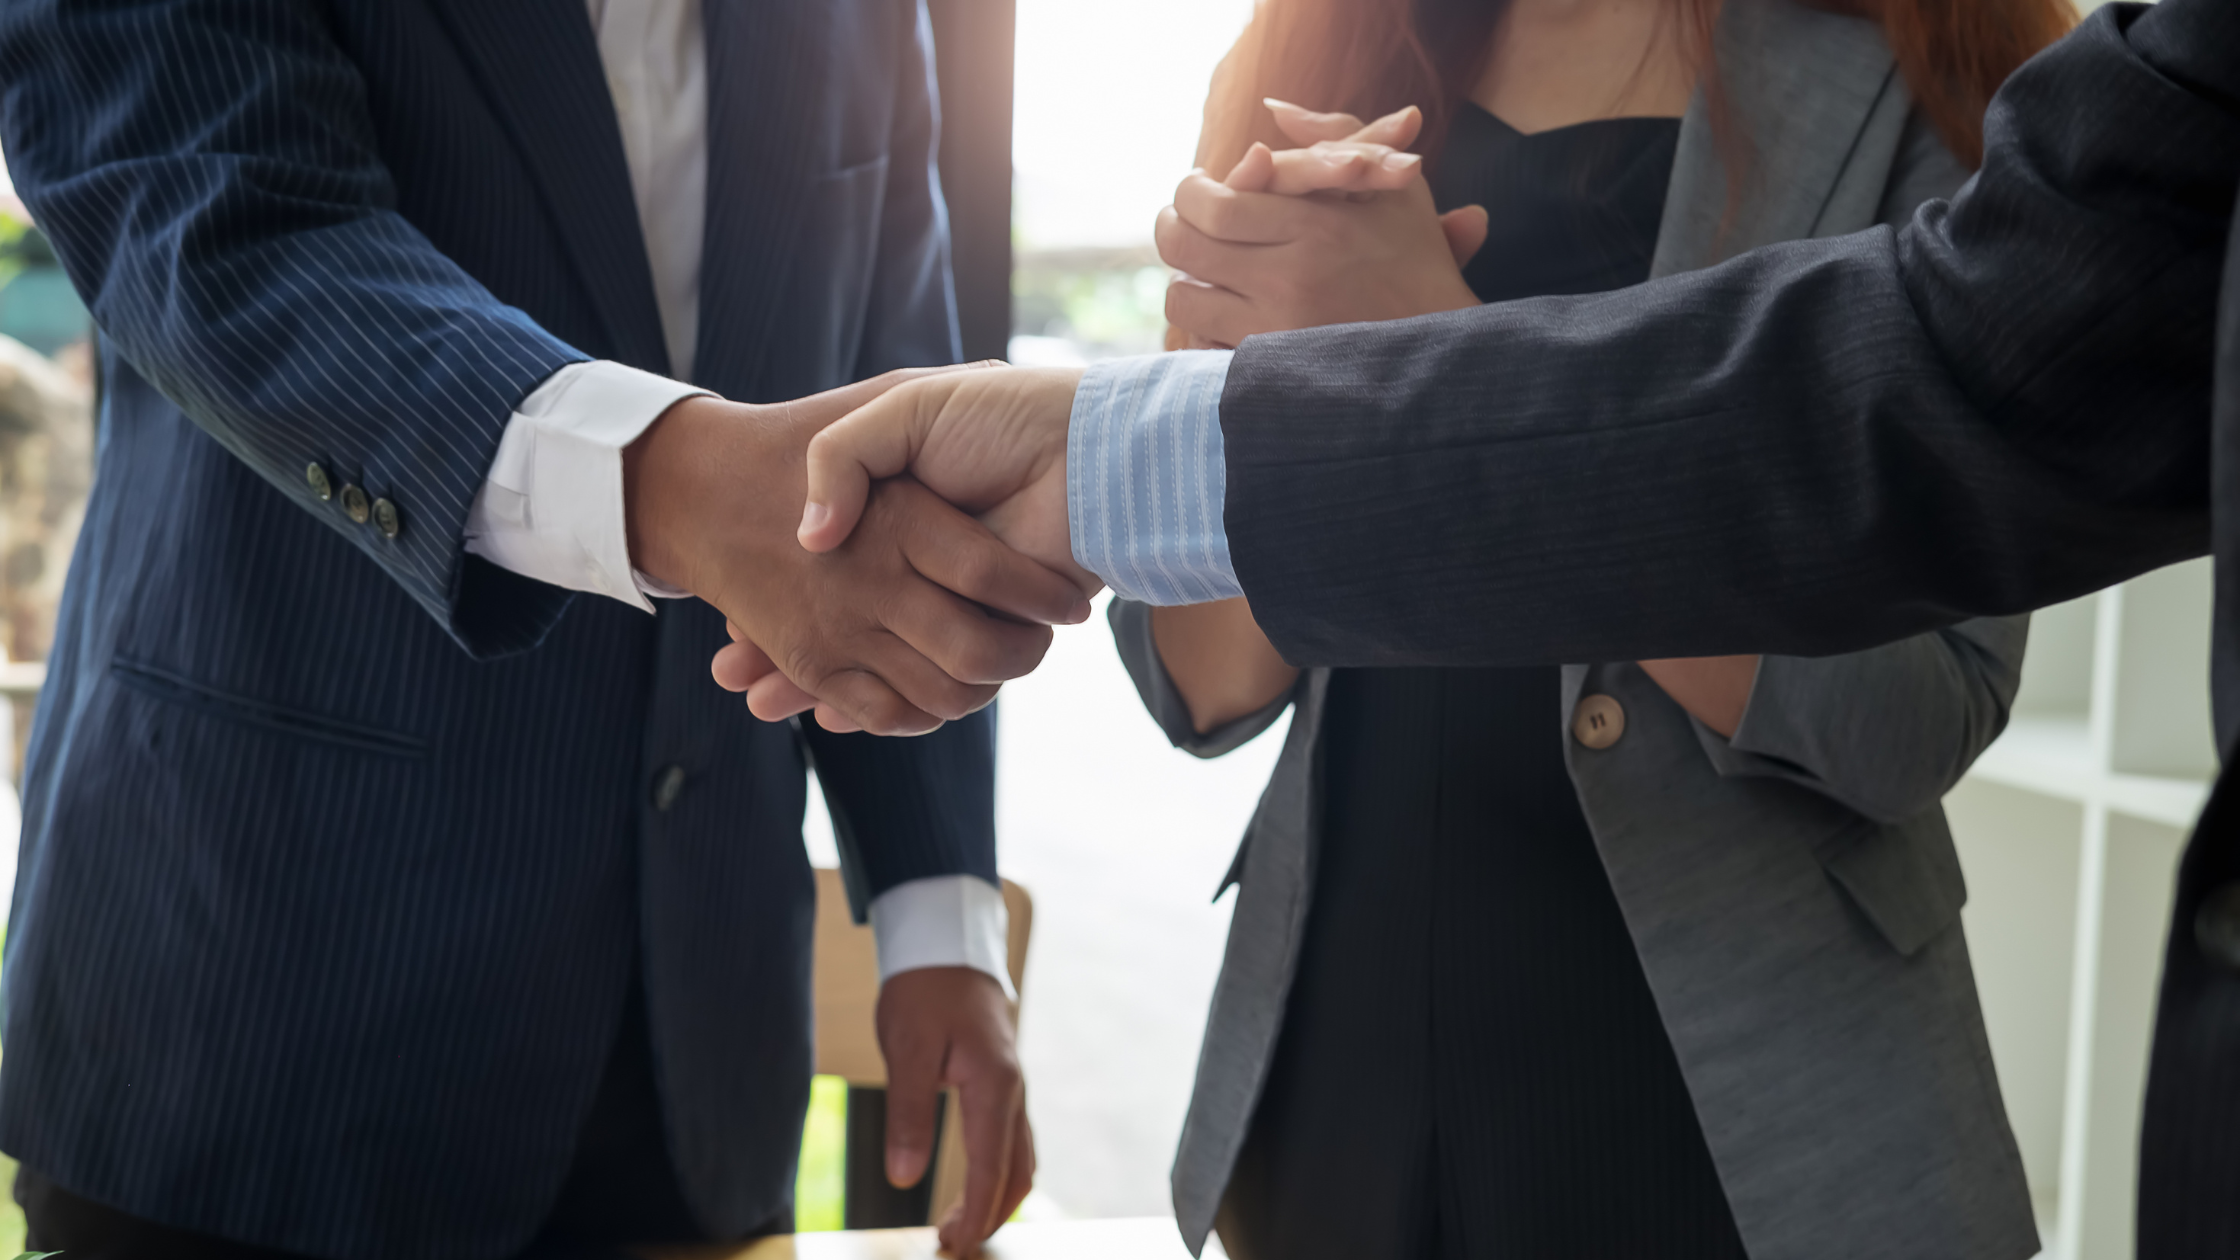 Shaking hands after a business deal- How Long Does It Take to Sell a Business? - The Tampa Business Broker
